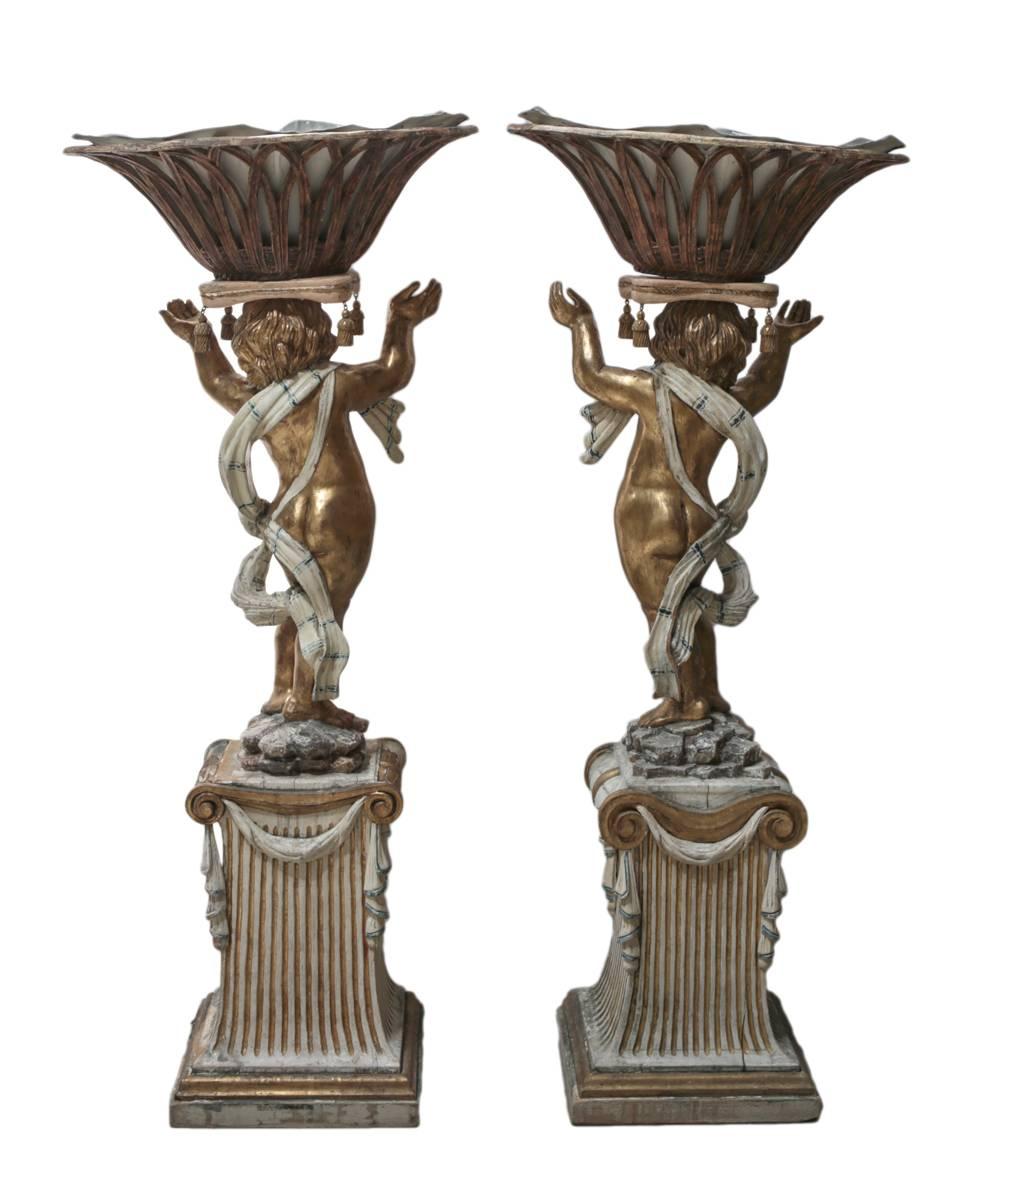 18th Century Italian Carved Wood Figural Putti Pedestal Planters For Sale 1